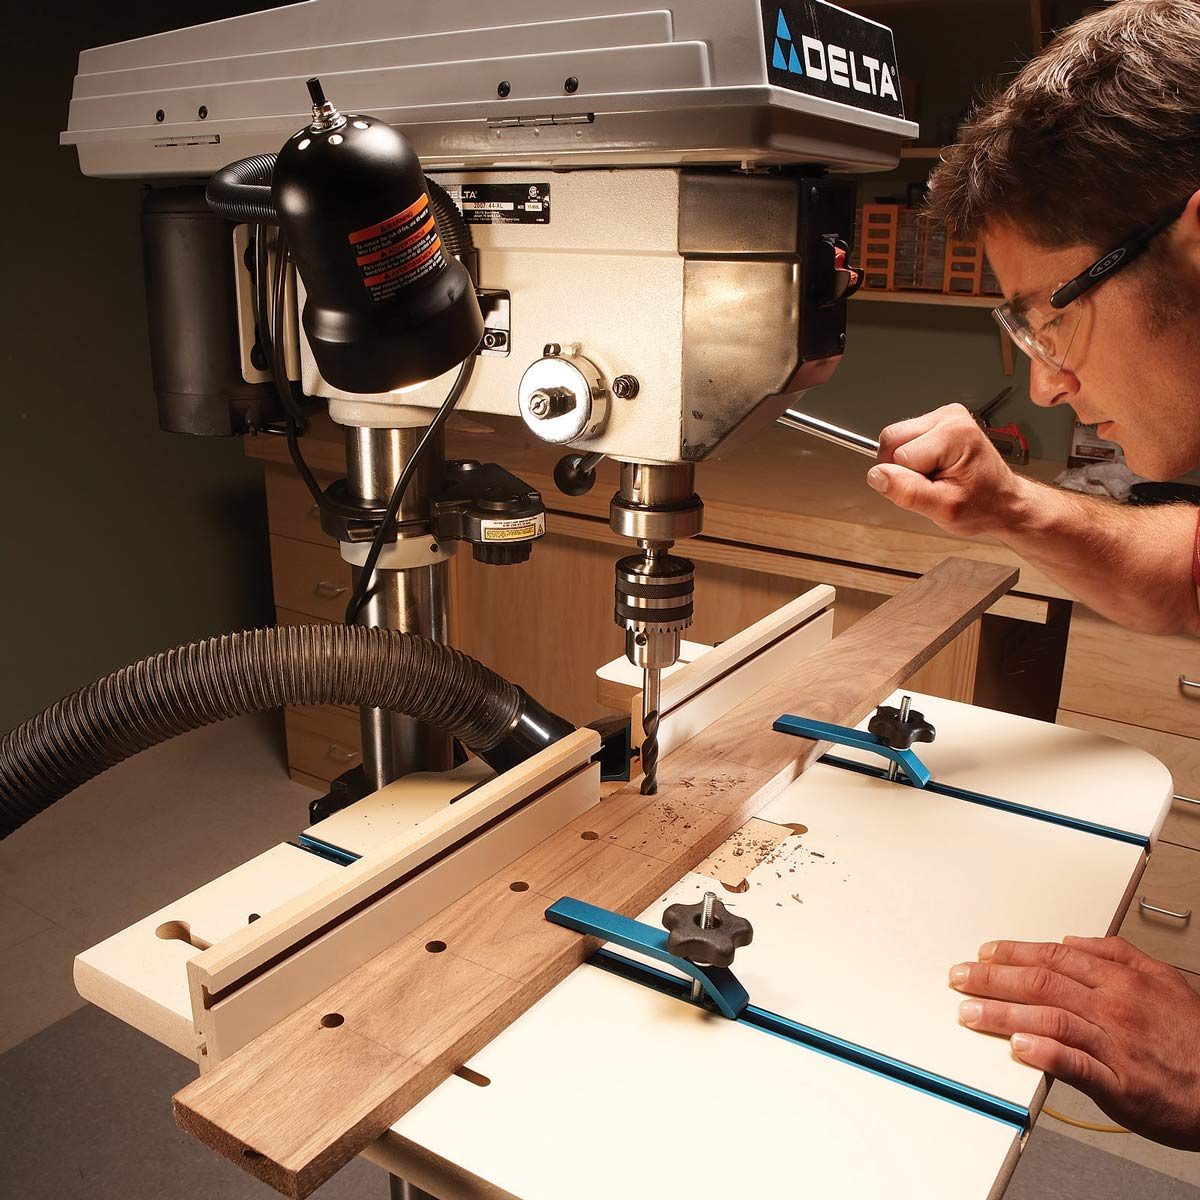 what should you do when operating a drill press?